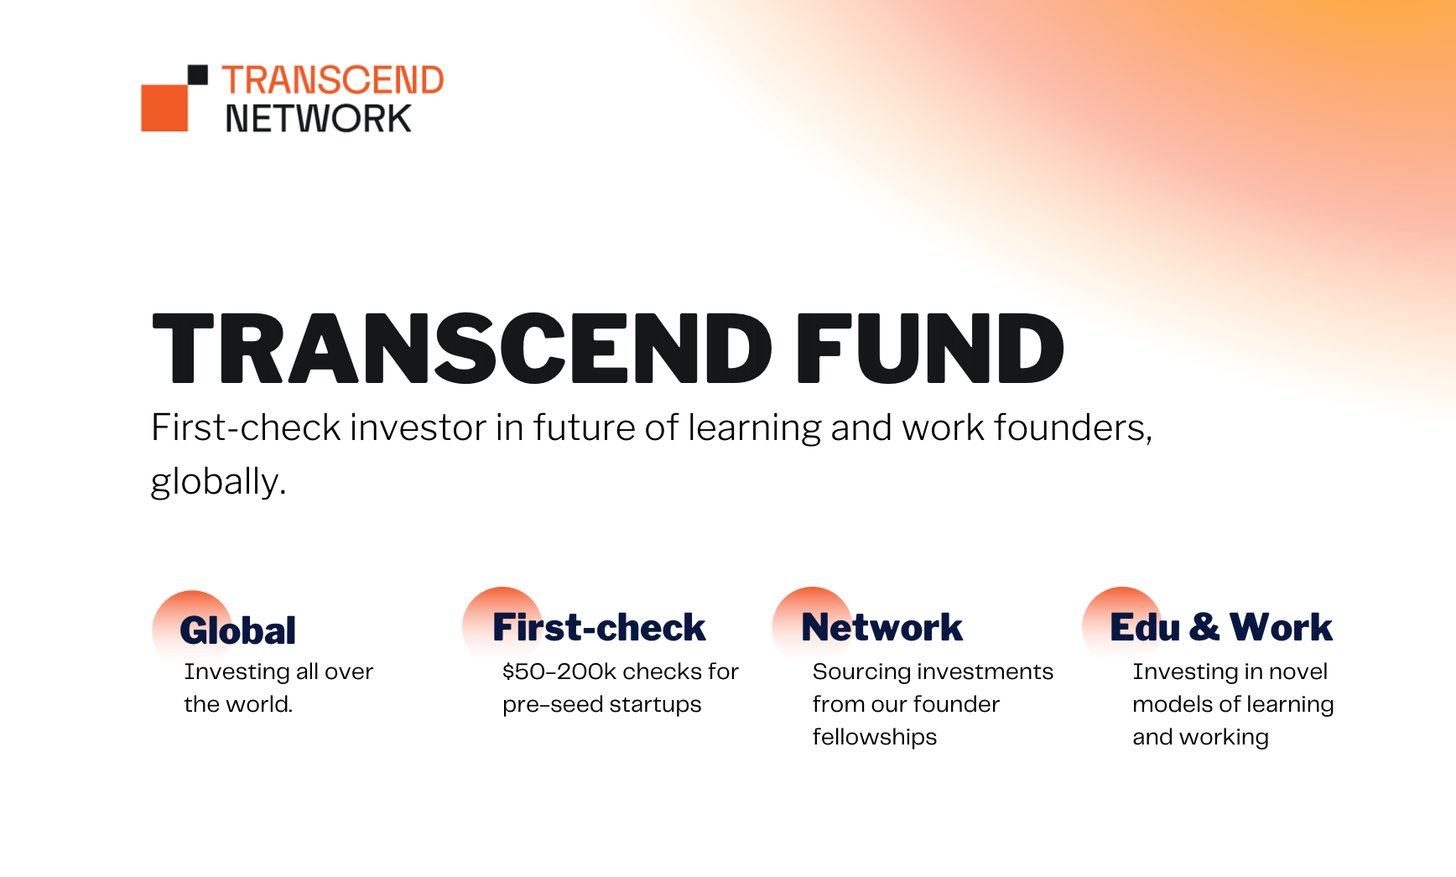 Transcend Network & The Future of Learning and Work, by Alberto Arenaza, Transcend Network